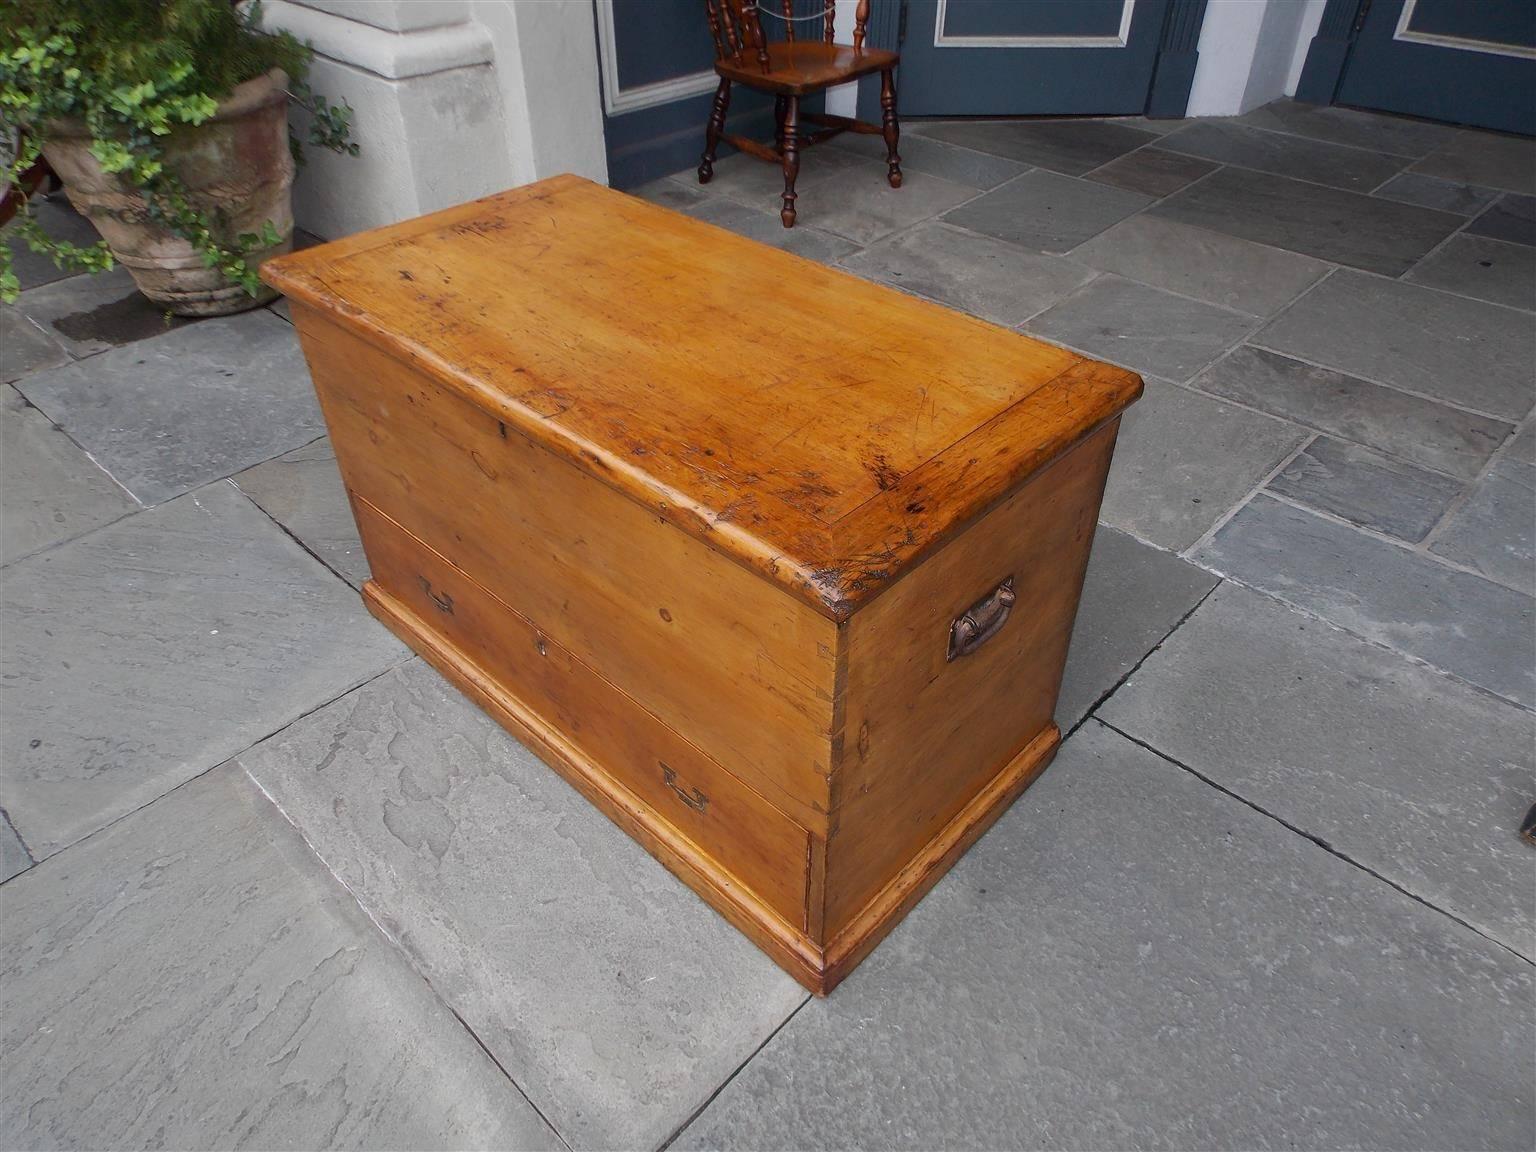 Hammered American White Pine Sailor's Nautical Traveling Chest, Circa 1810